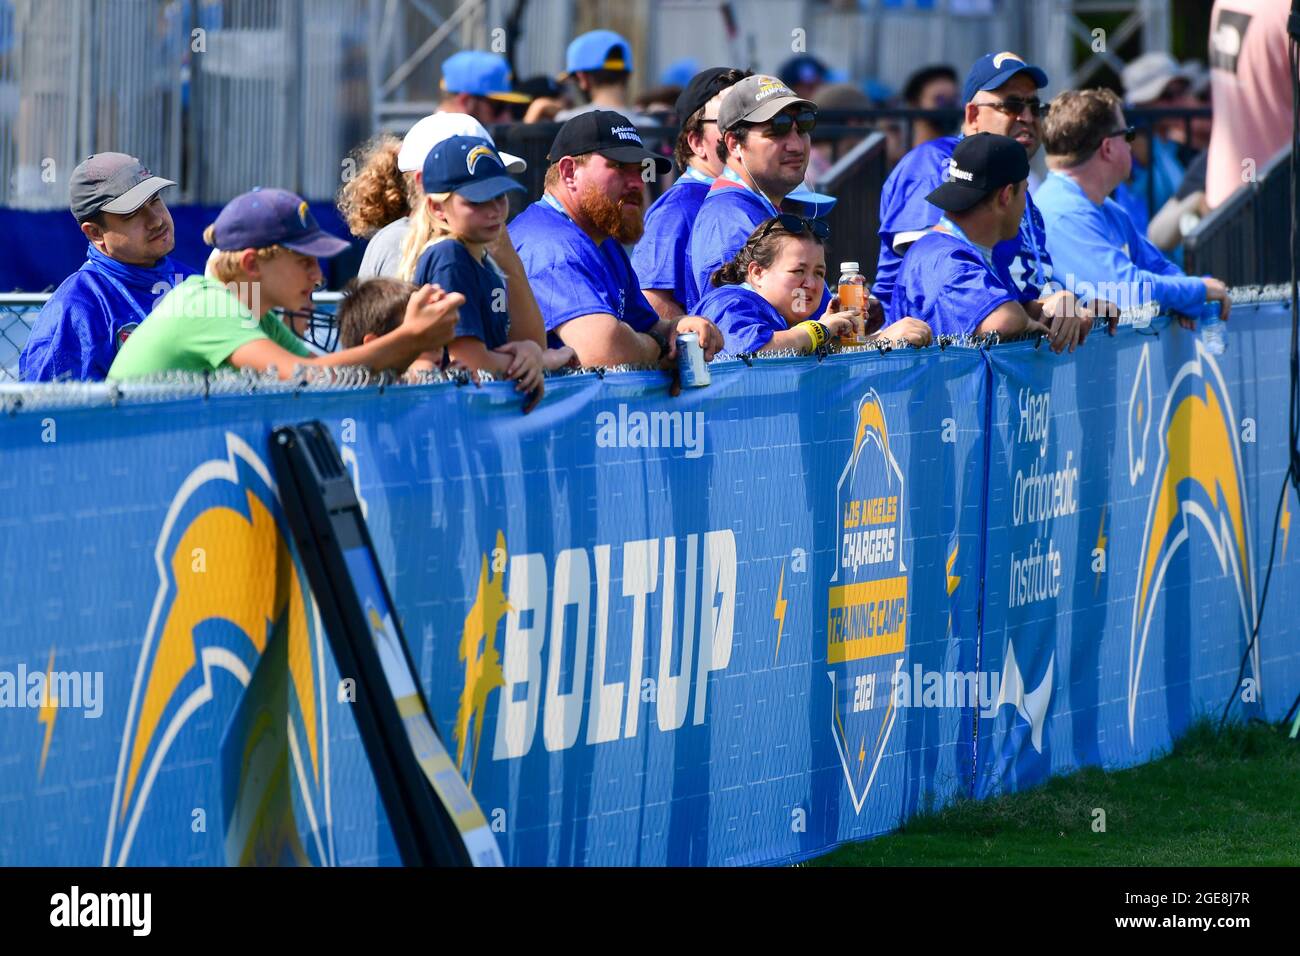 Los Angeles Chargers fans observe during training camp on Tuesday, Aug 17, 2021, in Costa Mesa, Calif. (Dylan Stewart/Image of Sport via AP) Stock Photo